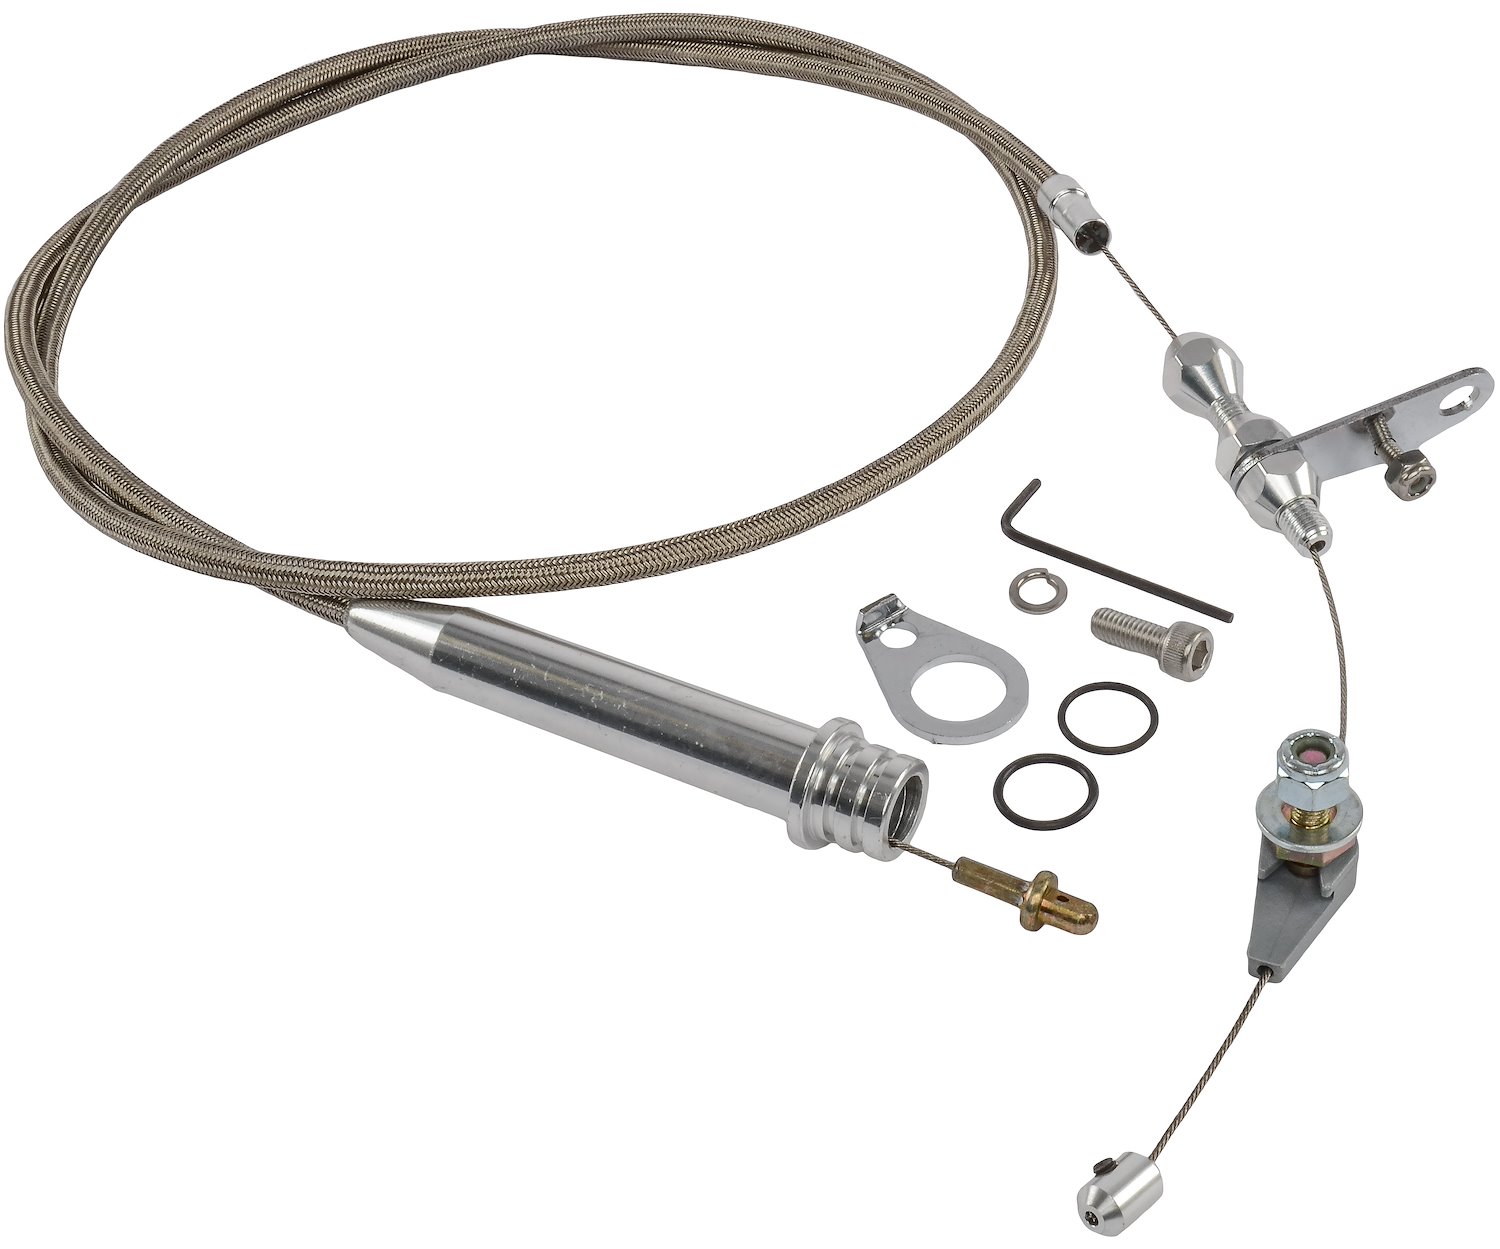 Transmission Kickdown Cable Kit [GMC/Chevy 4L60, Stainless Steel]